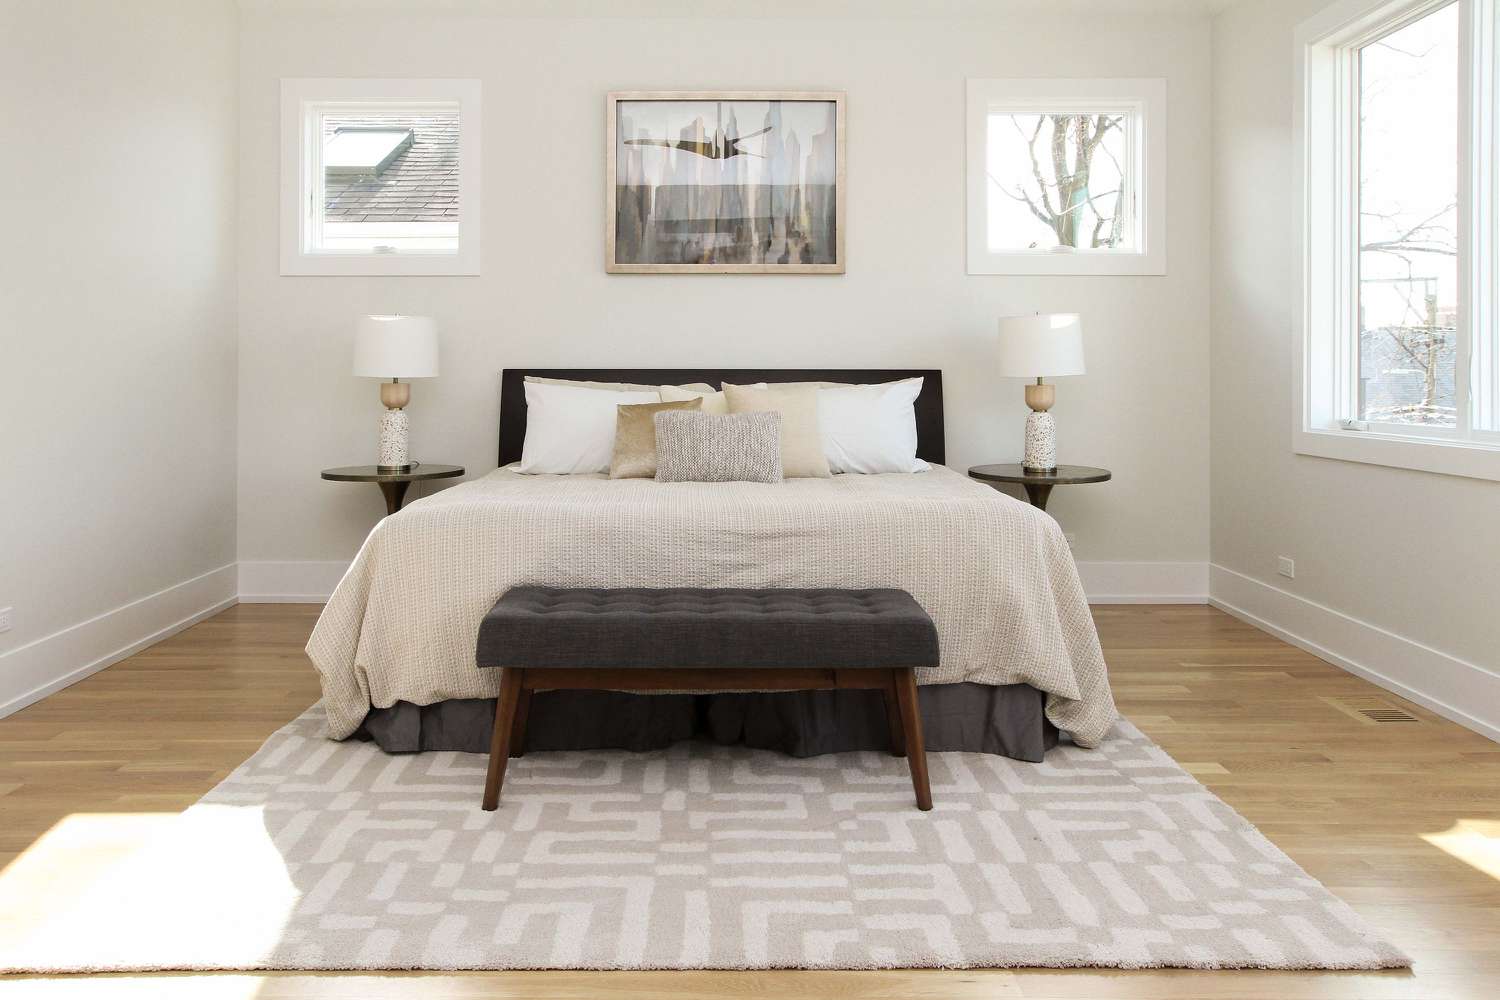 Where Can I Find Inspiration for Neutral Bedroom Color Schemes?